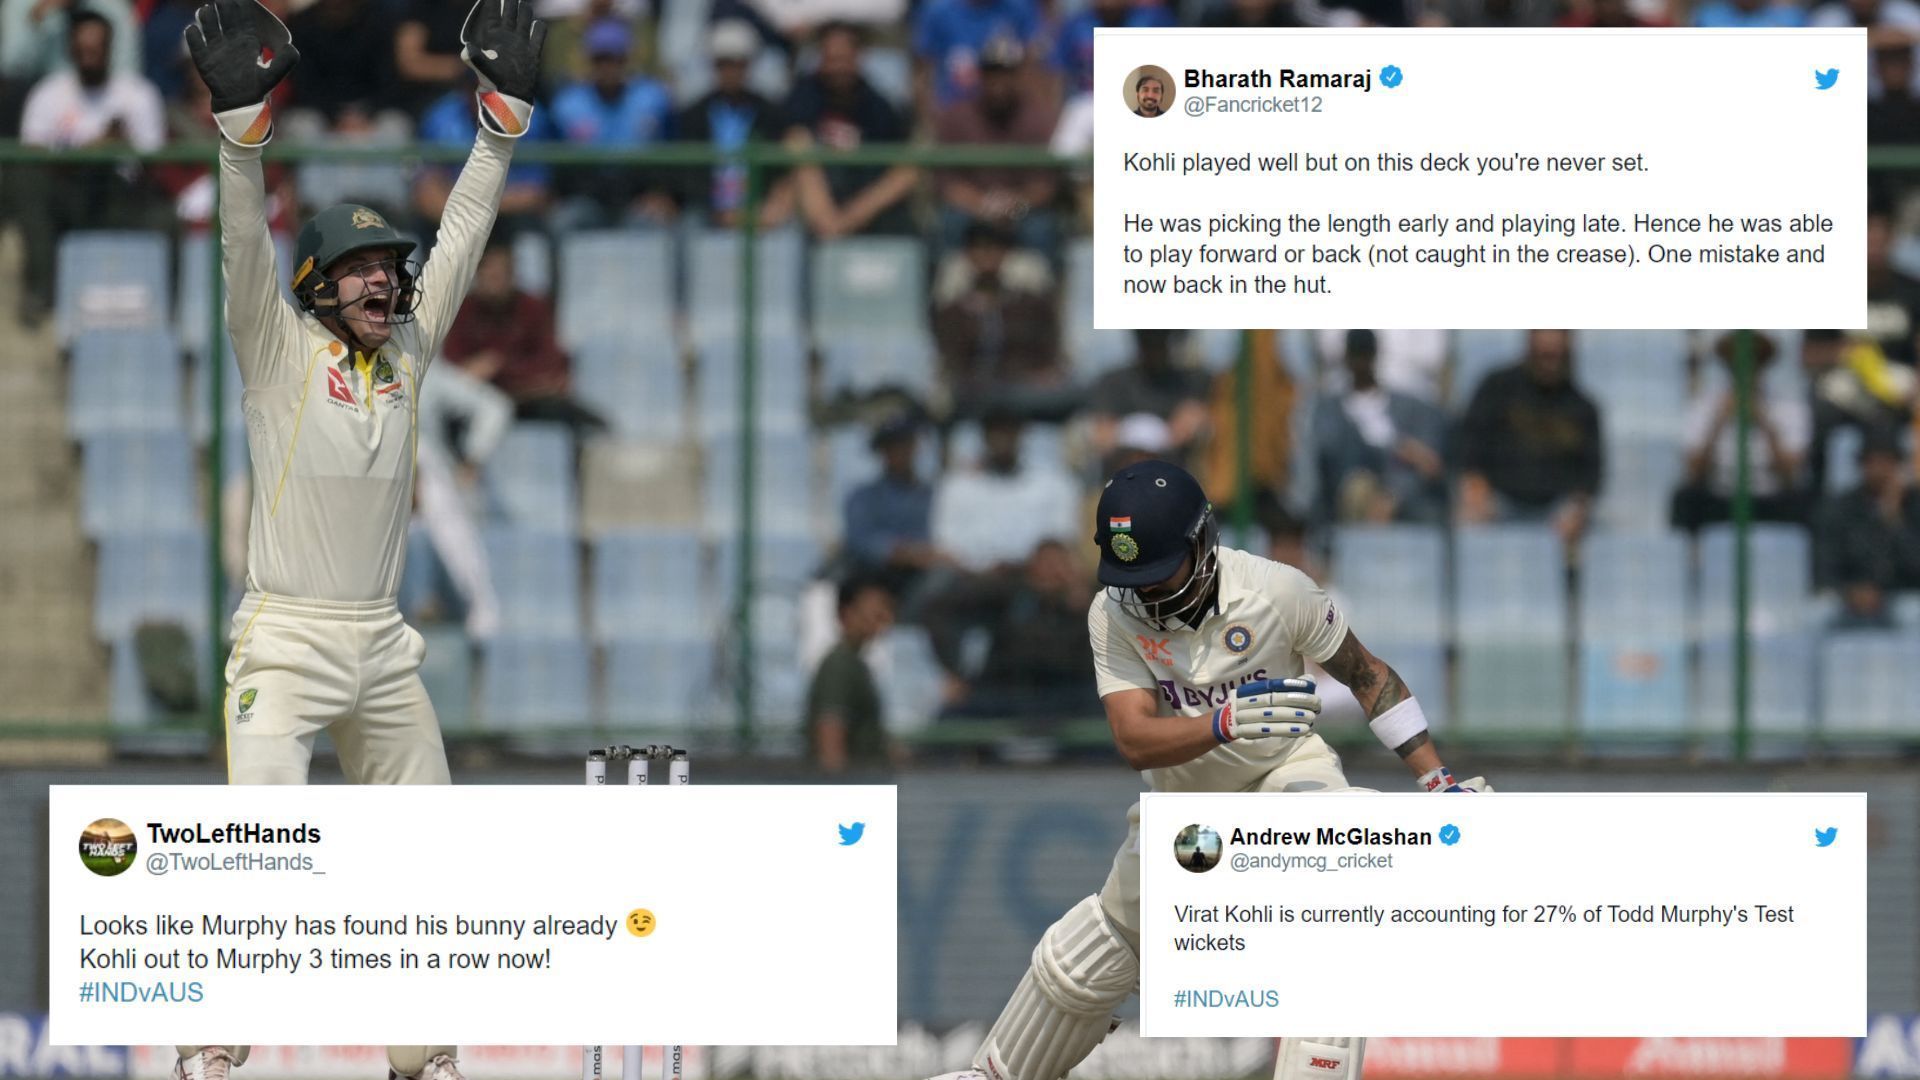 &quot;Looks like Murphy has found his bunny already&quot; - Twitterati reacts after Virat Kohli loses his wicket to the off-spinner again in 3rd IND vs AUS Test 